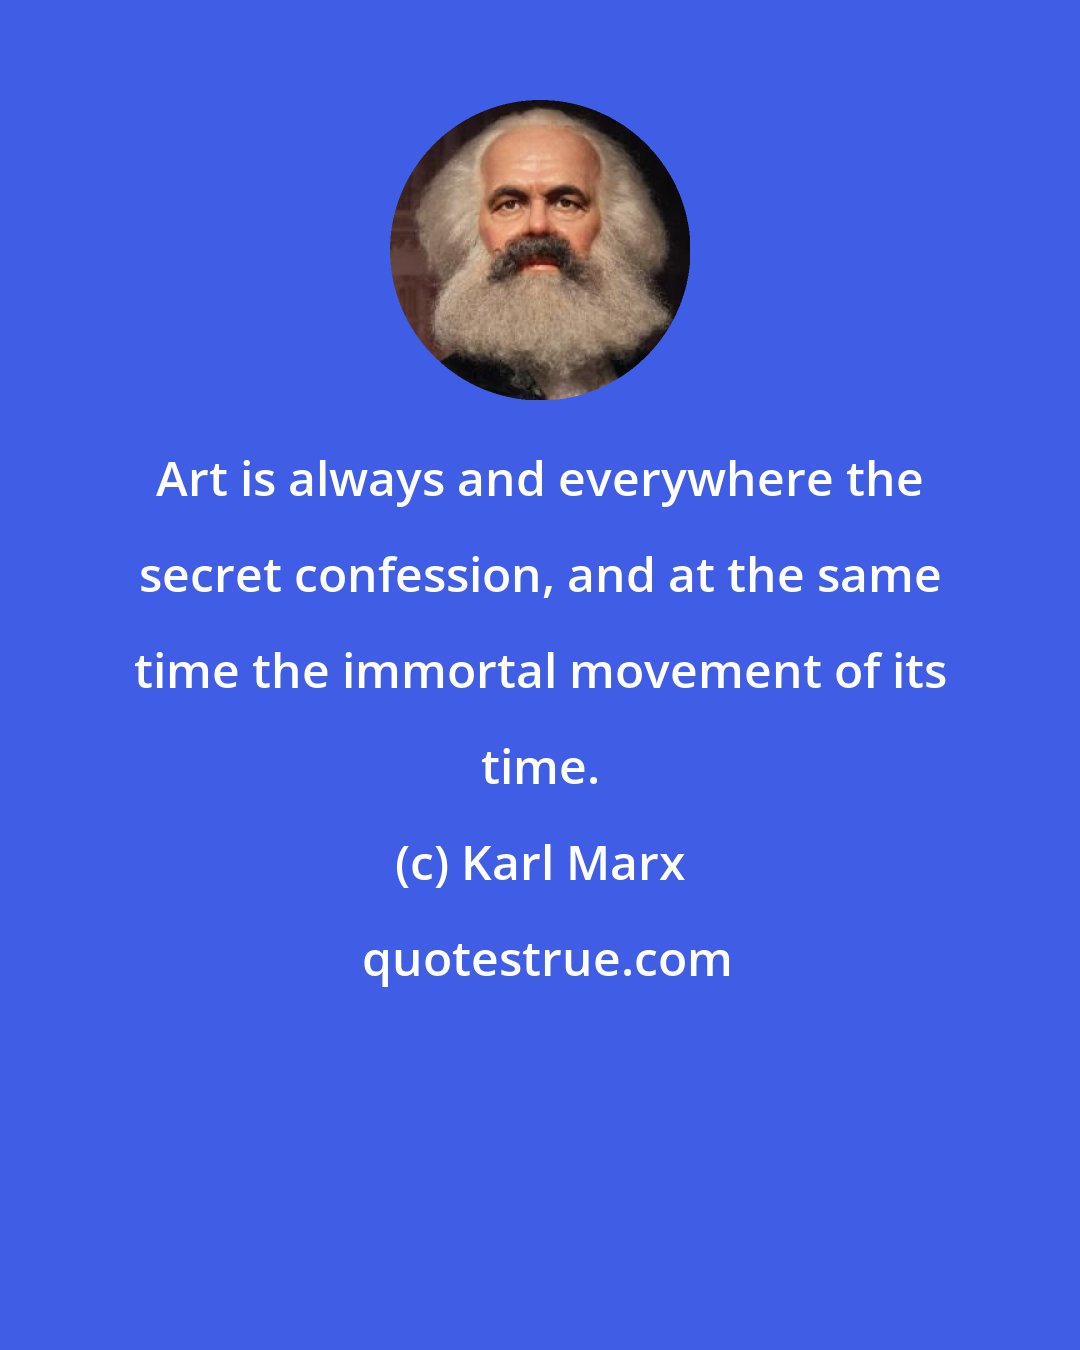 Karl Marx: Art is always and everywhere the secret confession, and at the same time the immortal movement of its time.